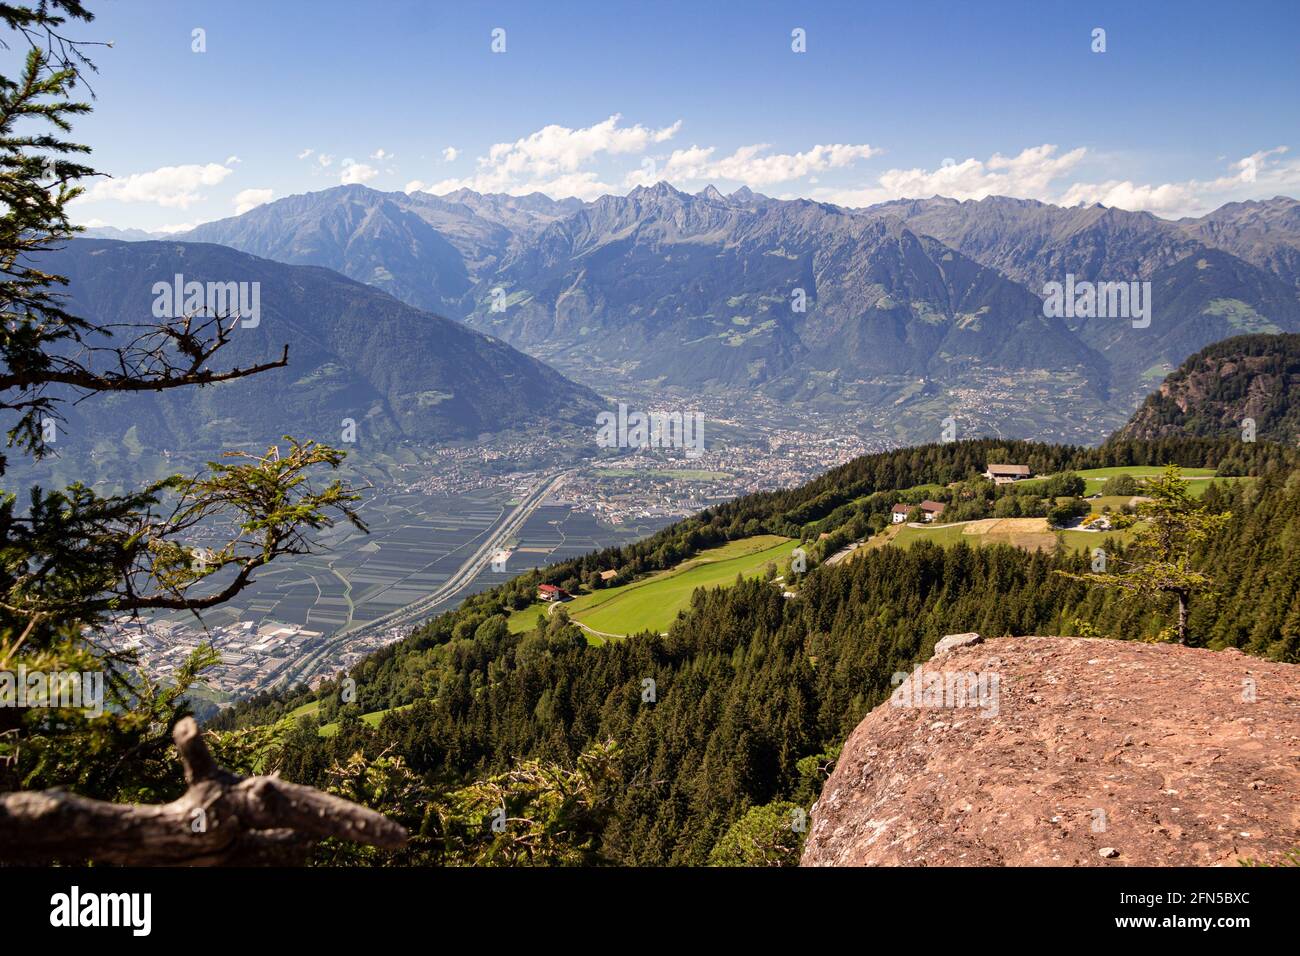 Panoramic high angle view over city of Merano and mountain range Texelgruppe seen from iconic view point 'Knottnkino' in Vöran, South Tyrol, Italy Stock Photo